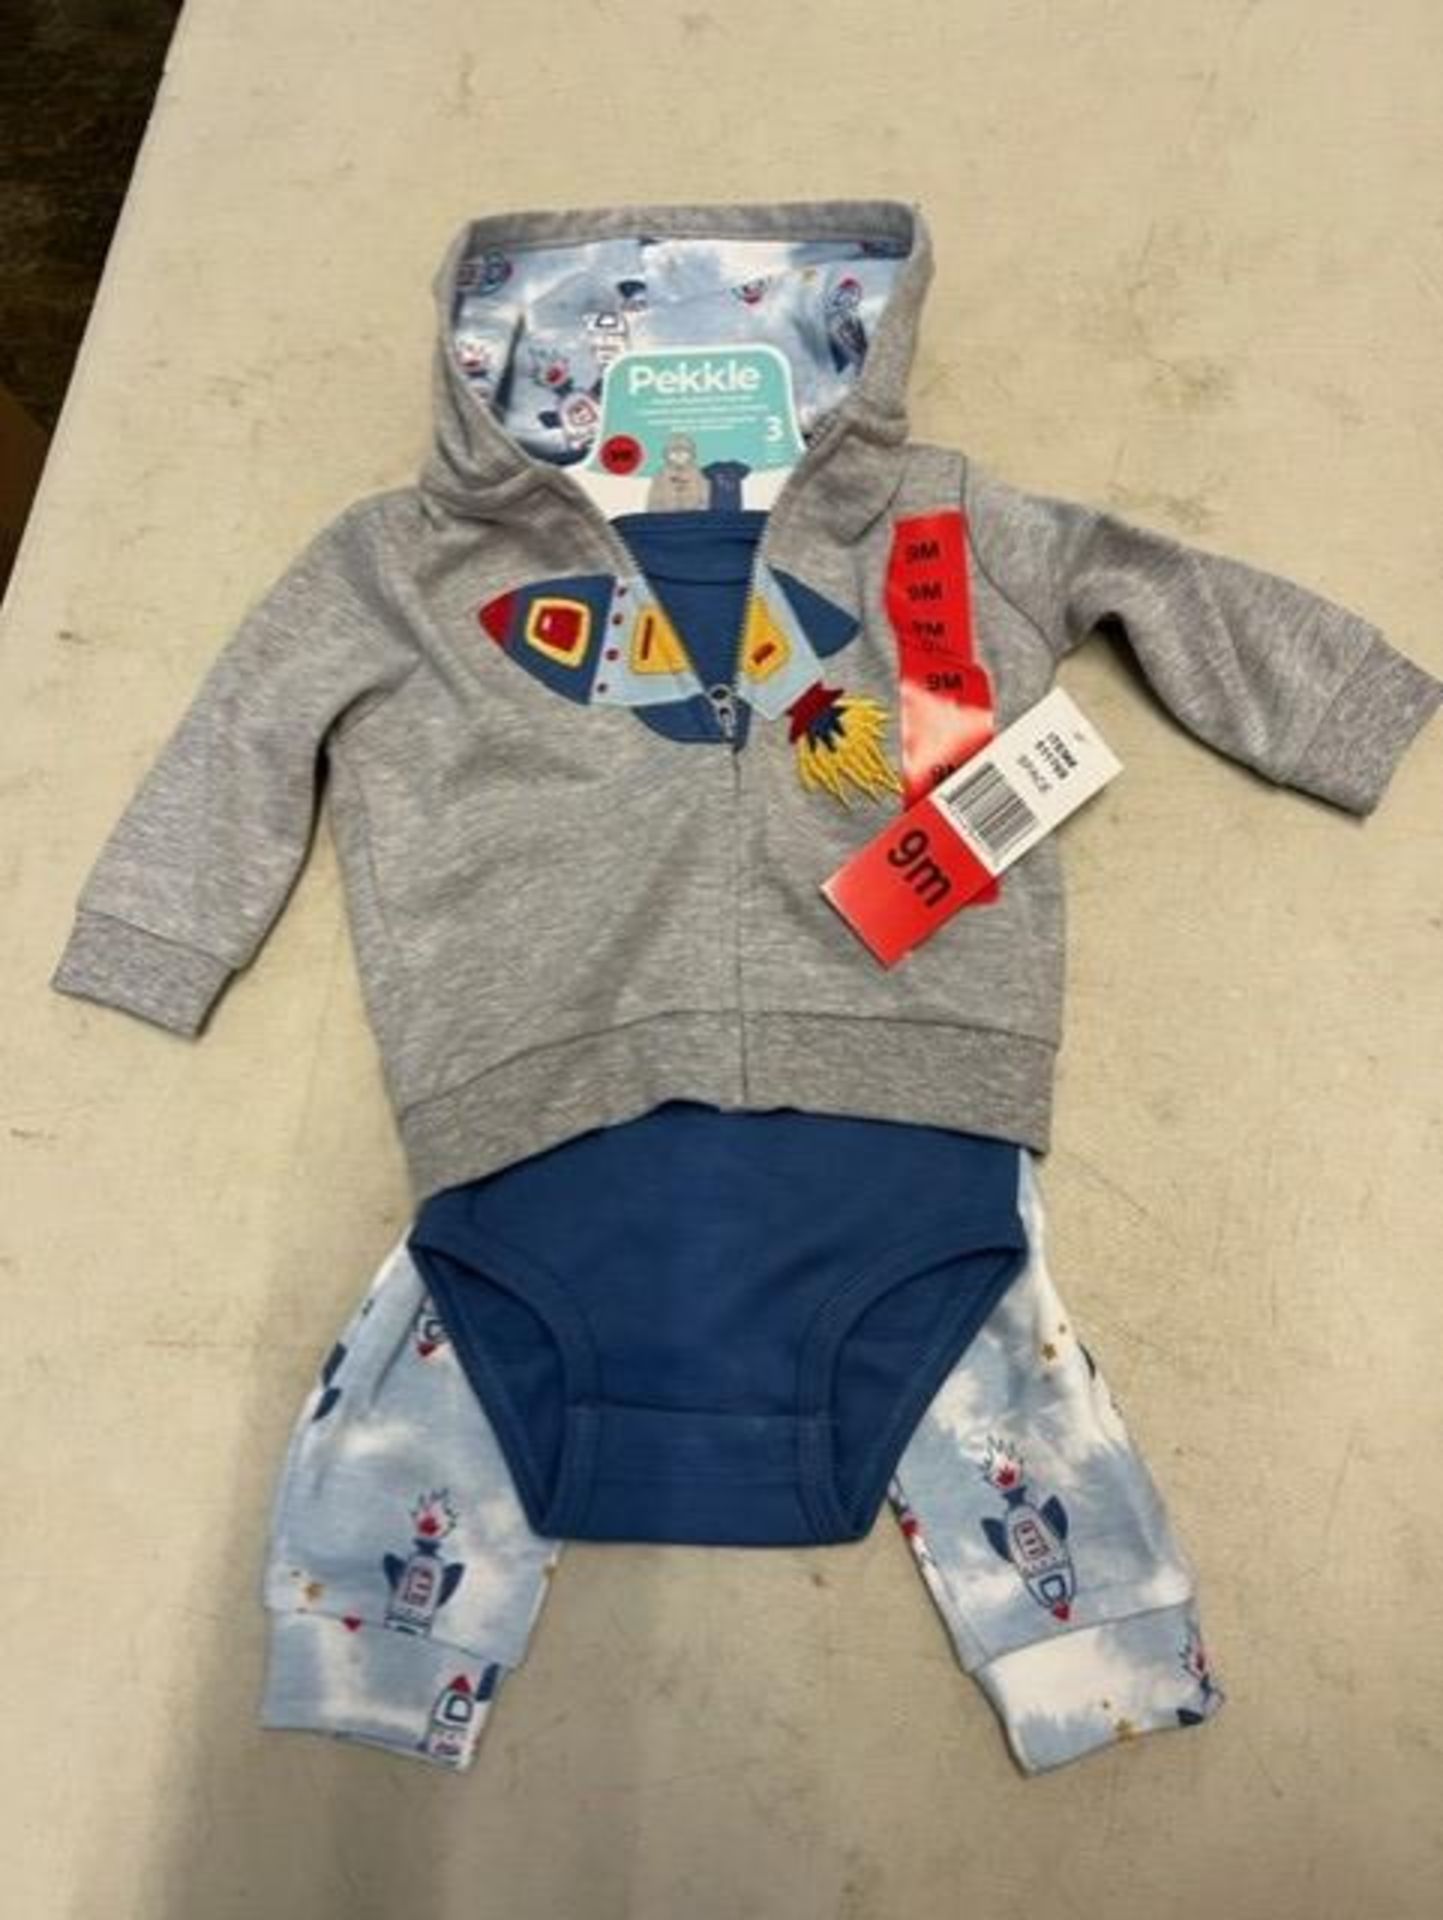 1 BRAND NEW PEKKLE 3 PIECE - HOODIE, BODYSUIT AND PANT SET SIZE 9M RRP Â£19